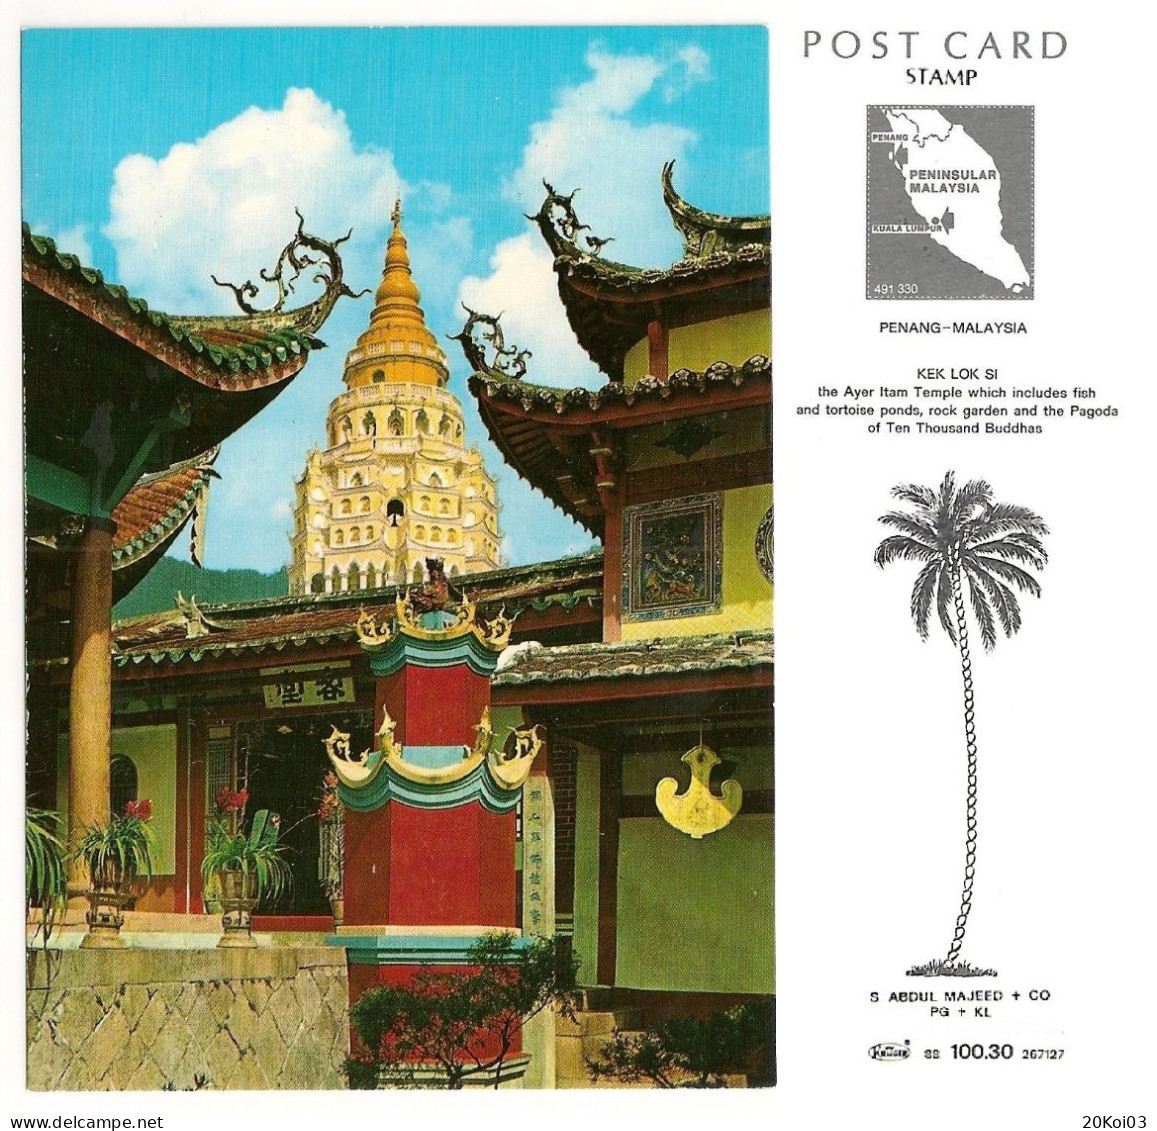 Malaysia Penang KEK LOK SI, Ayer Itam Temple, +/-1975's_UNC SUP_Kruger 88_100.30_S Abdul Majeed+CO_PG+KL_CPSM_cpc - Malasia